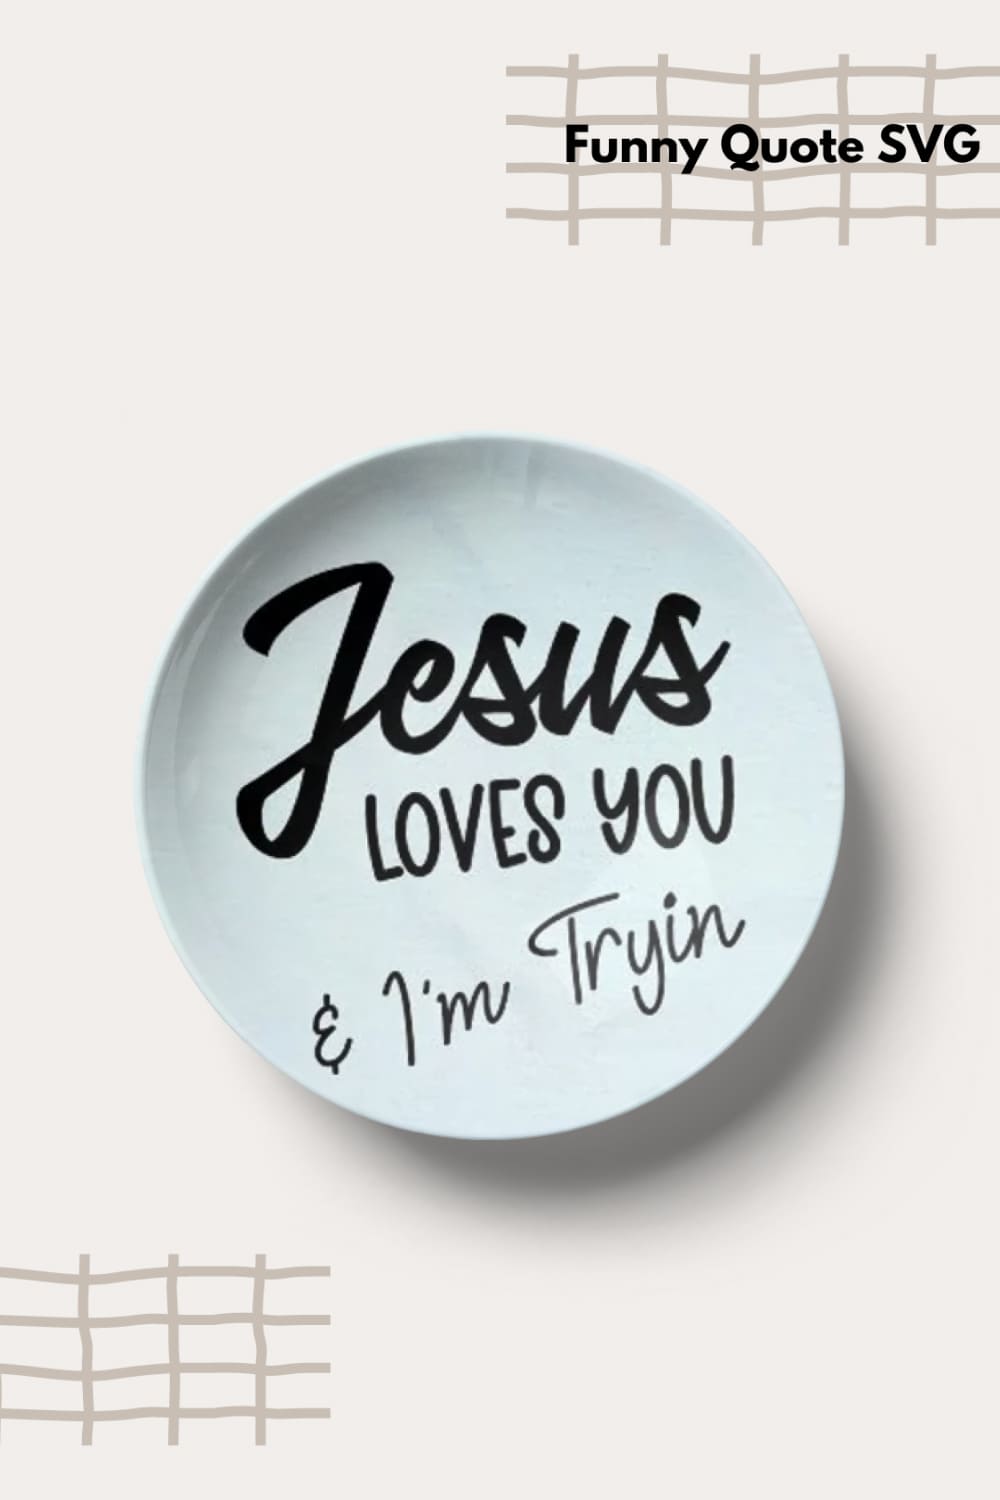 The inscription "Jesus loves you" is written on a white plate.